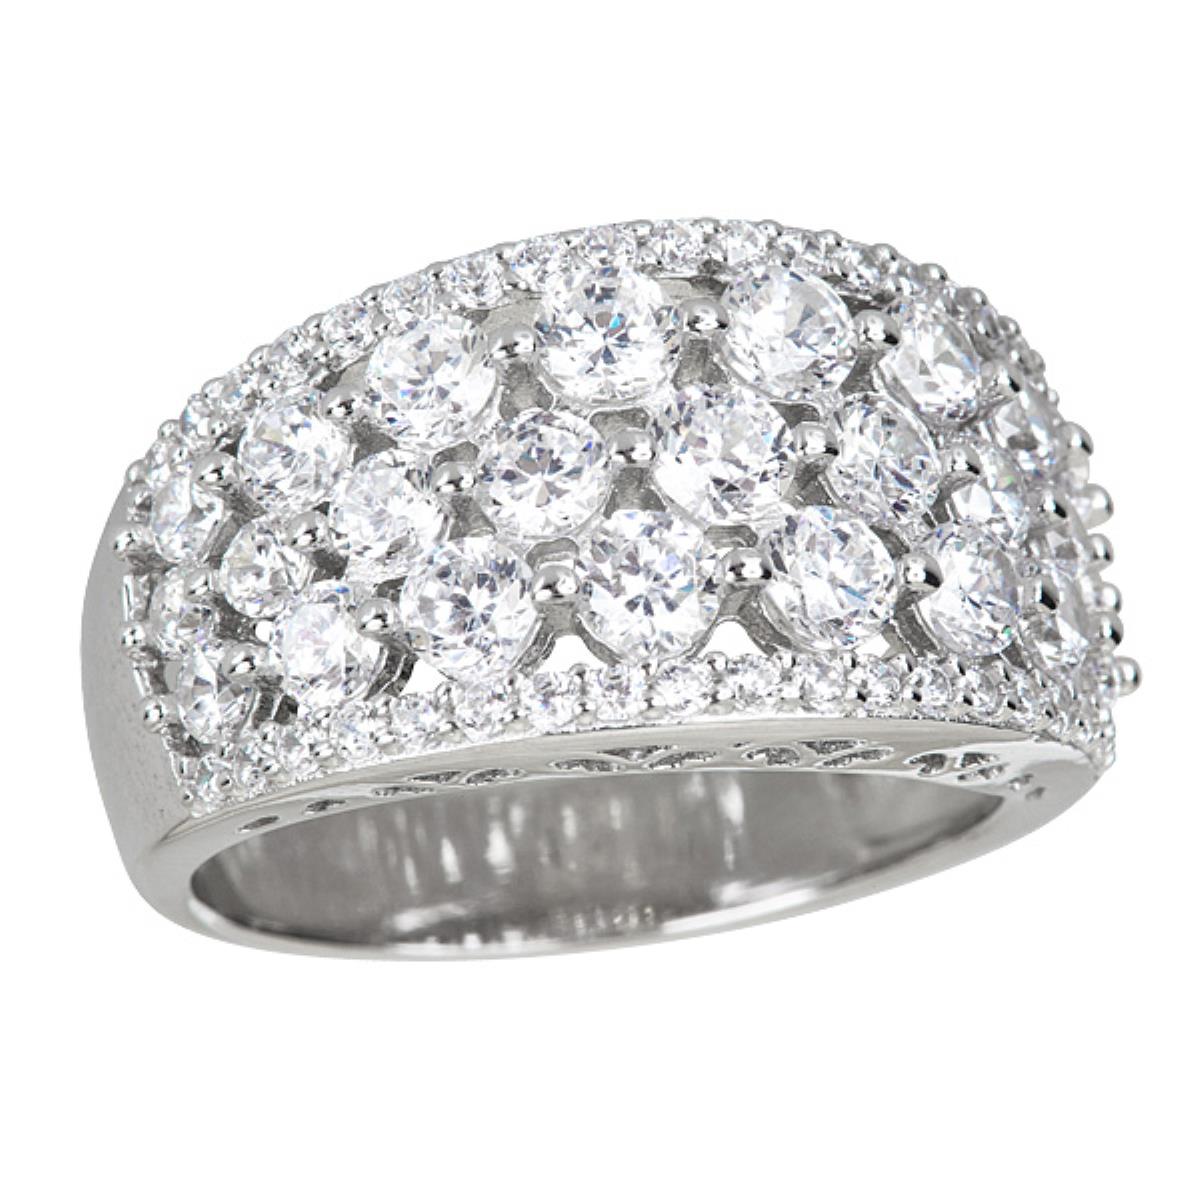 Sterling Silver Pave Concave Fash Pave Ring